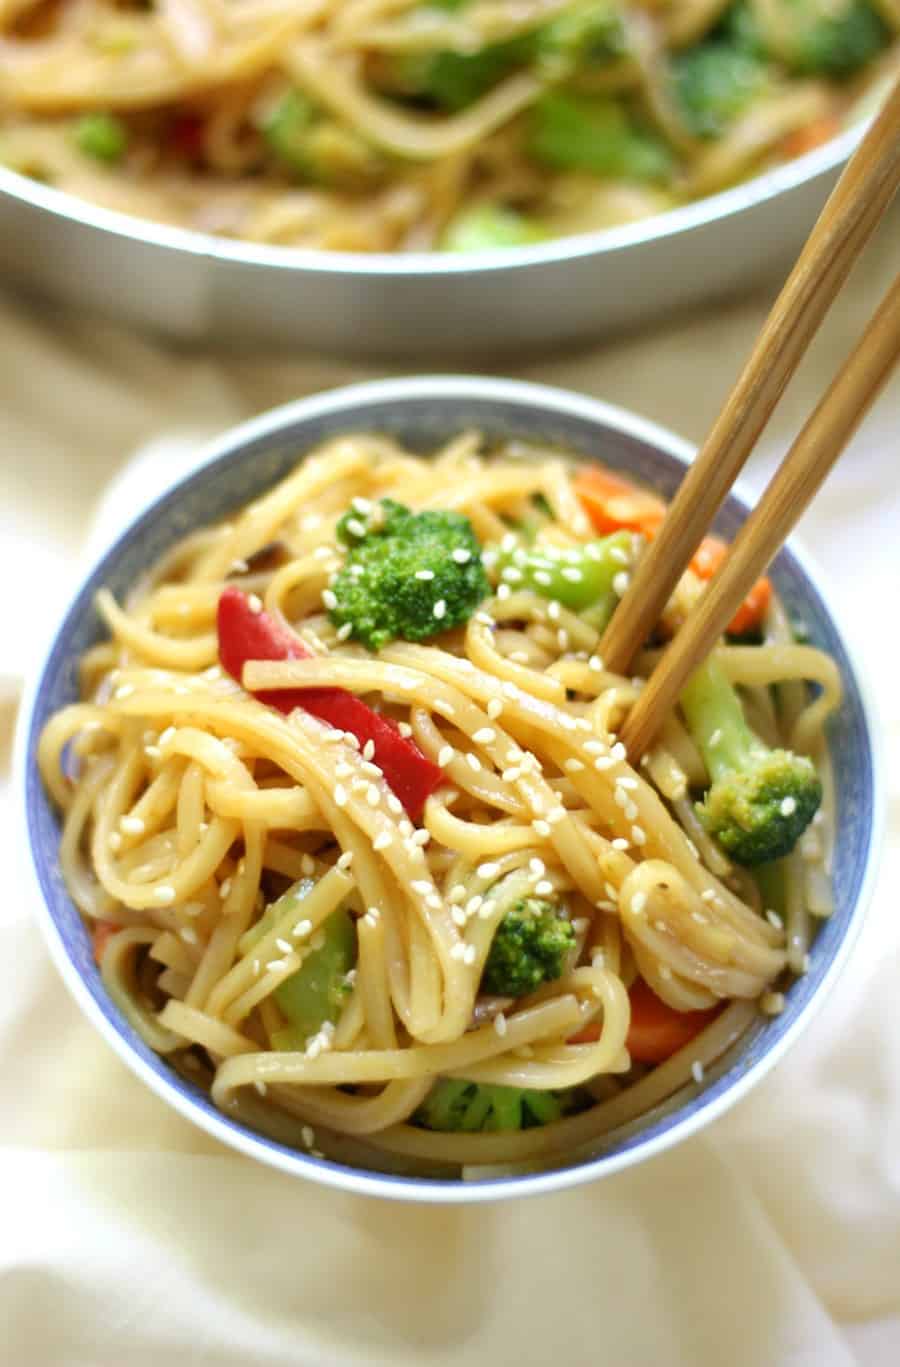 10-Minute Gluten-Free Vegetable Lo Mein (Vegan, Allergy-Free) | Strength and Sunshine @RebeccaGF666 You can have this side dish on the table in 10 minutes! A quick & easy 10-Minute Gluten-Free Vegetable Lo Mein recipe that's better than Chinese take-out, is vegan, and top-8 allergy-free! Great for dinner and perfect for using as healthy leftover lunches! 